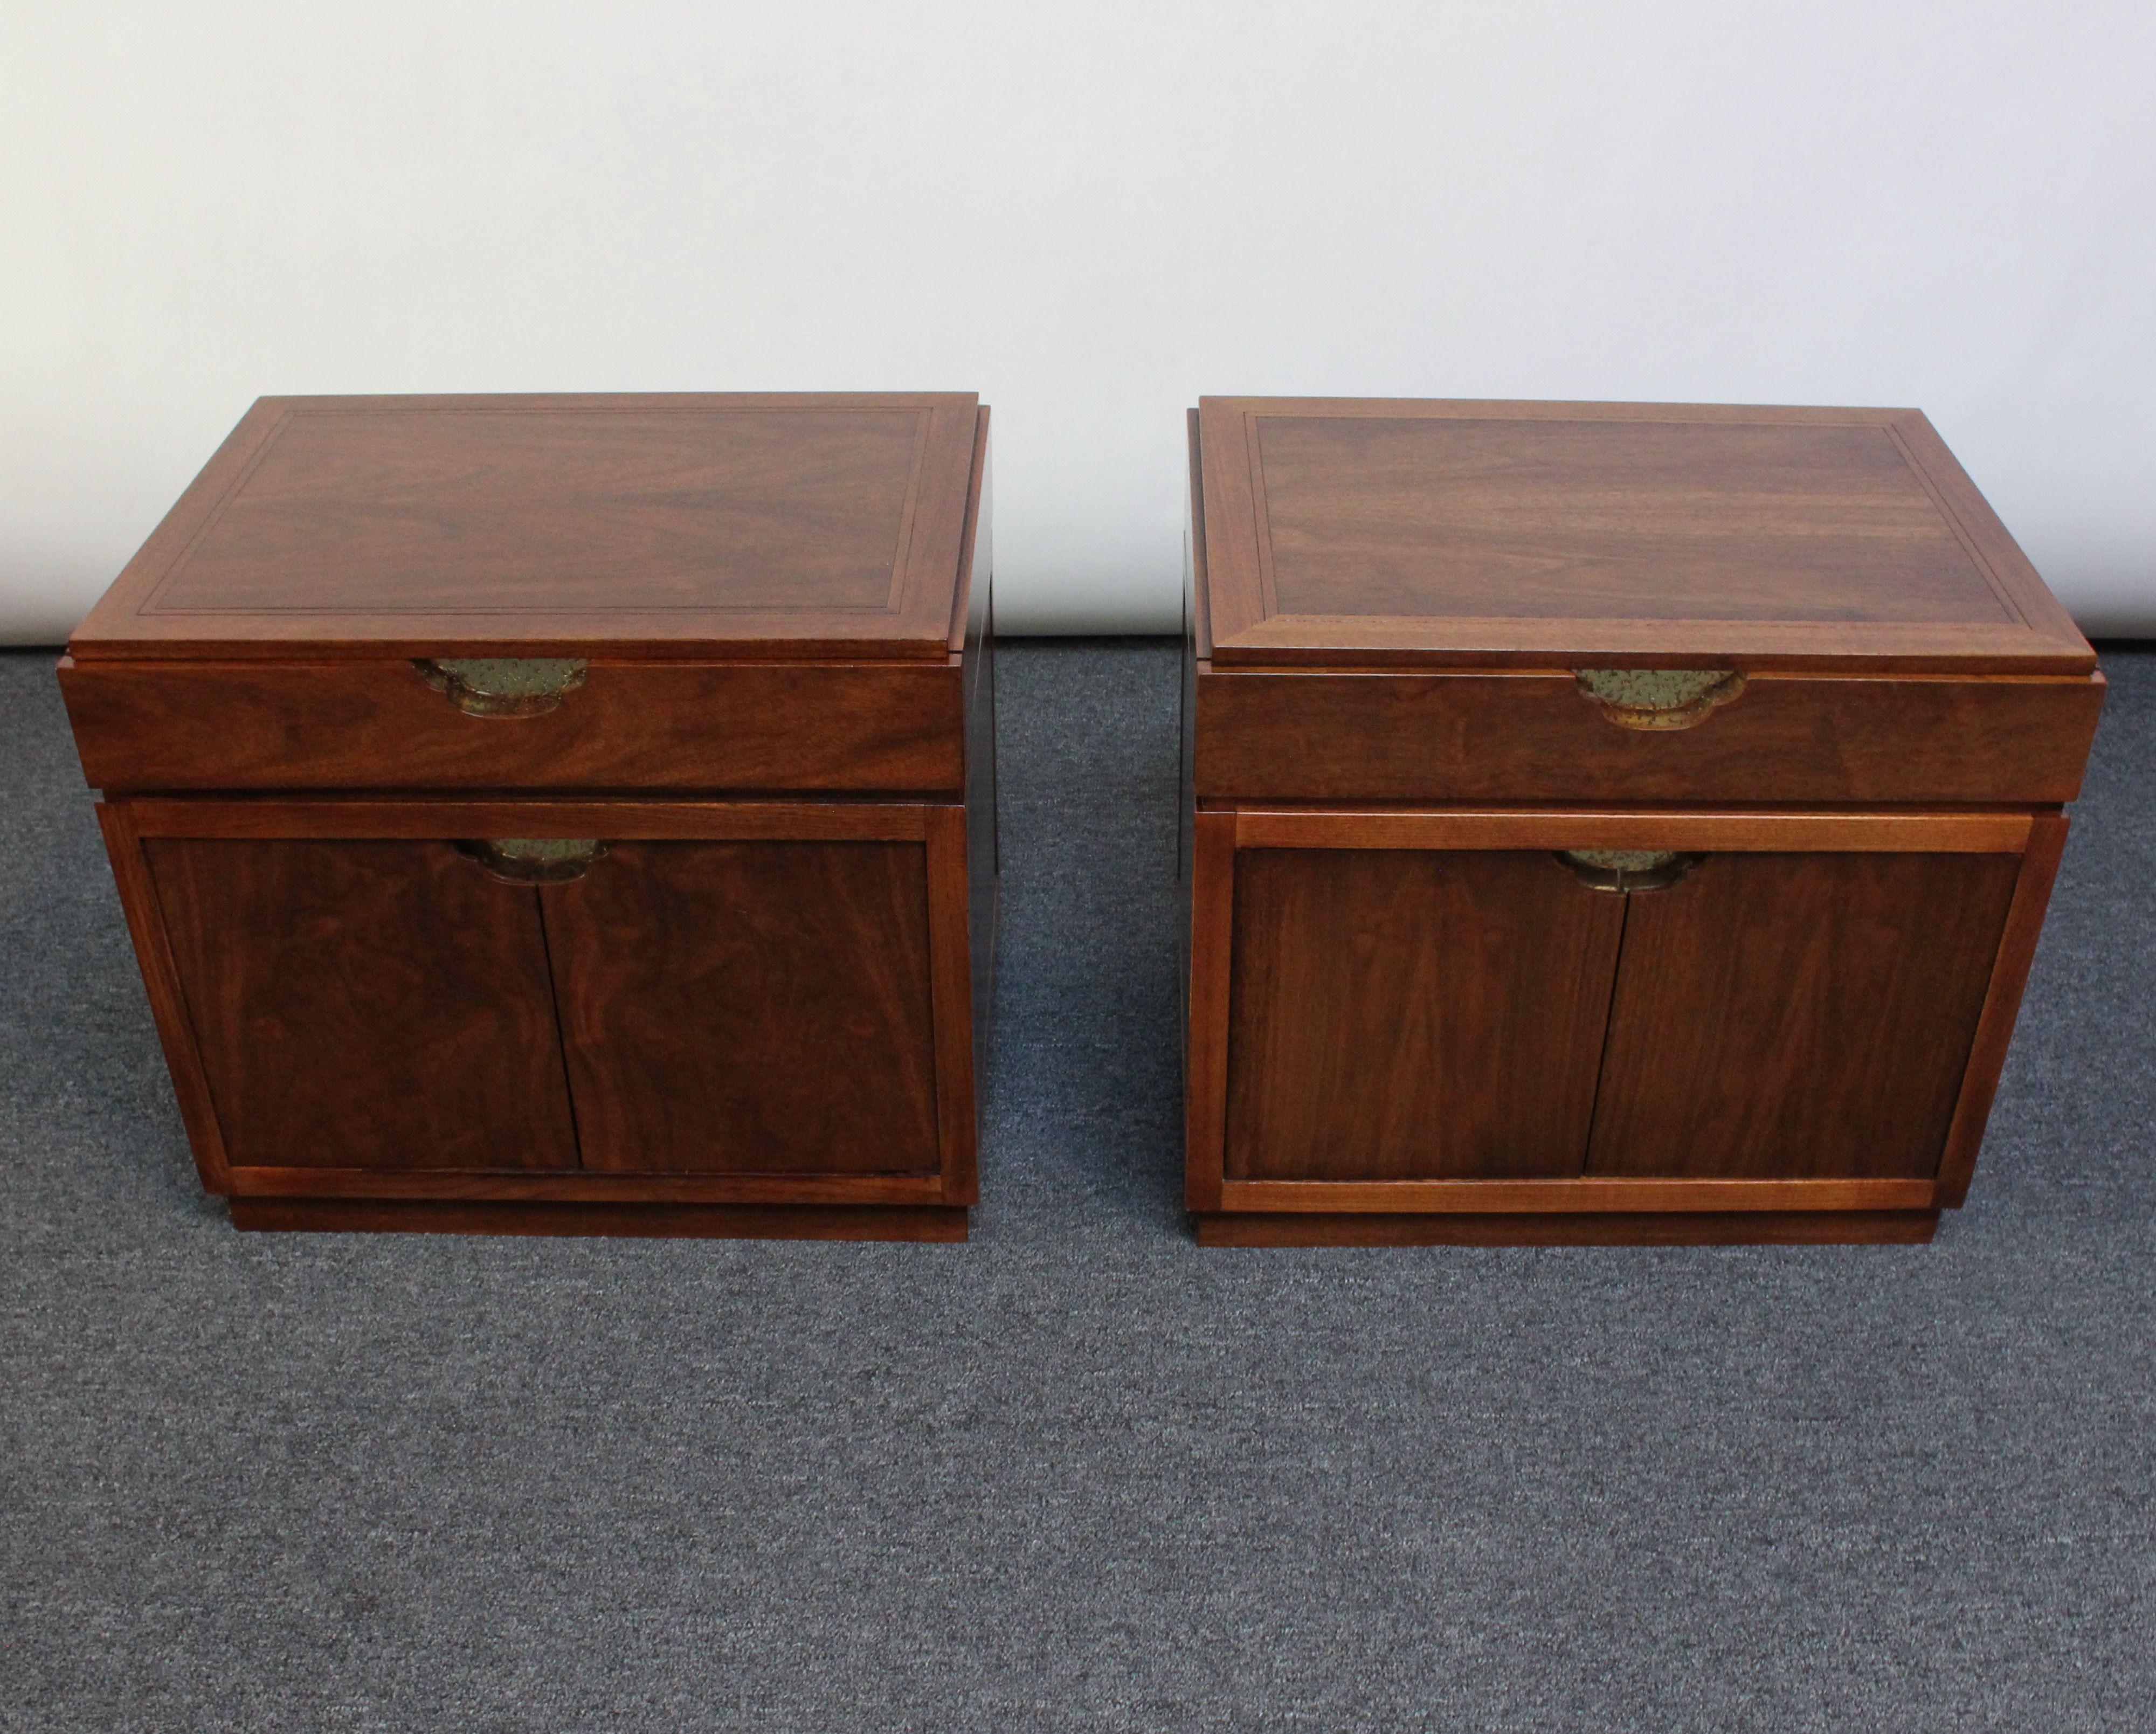 Elegant and scarce pair of Baker black walnut nightstands with recessed, hammered and etched brass drawer-pulls (ca. 1980,USA).
Dual doors concealing open storage on the bottom and a shallow drawer on top.
Exquisite wood grain with vertical